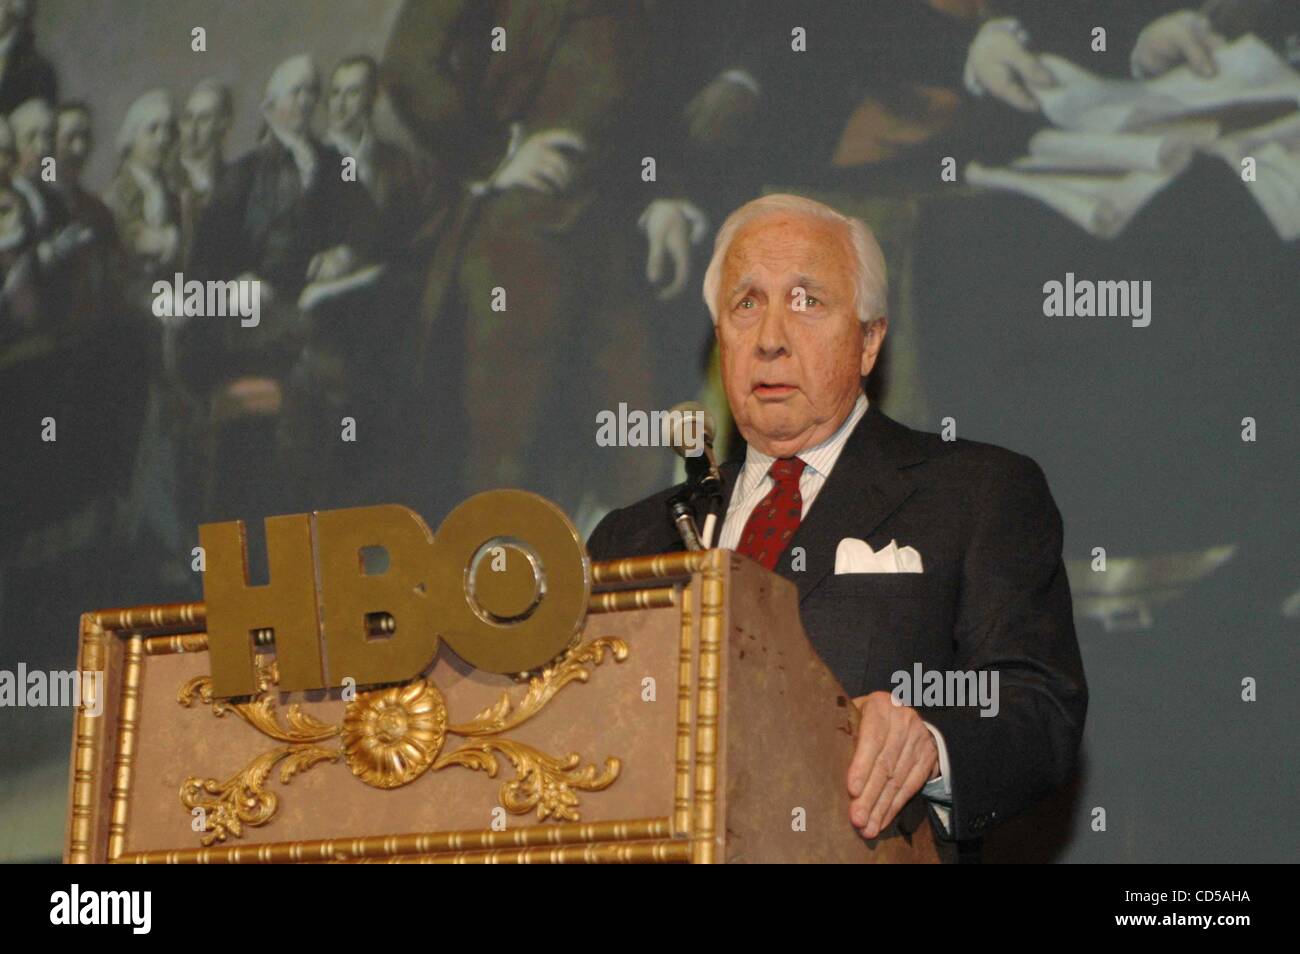 Historian David McCullough at the Richmond, VA premiere of HBO's film epic miniseries 'John Adams' held at the historic Byrd Theatre on March 9, 2008 copyright Tina Fultz Stock Photo